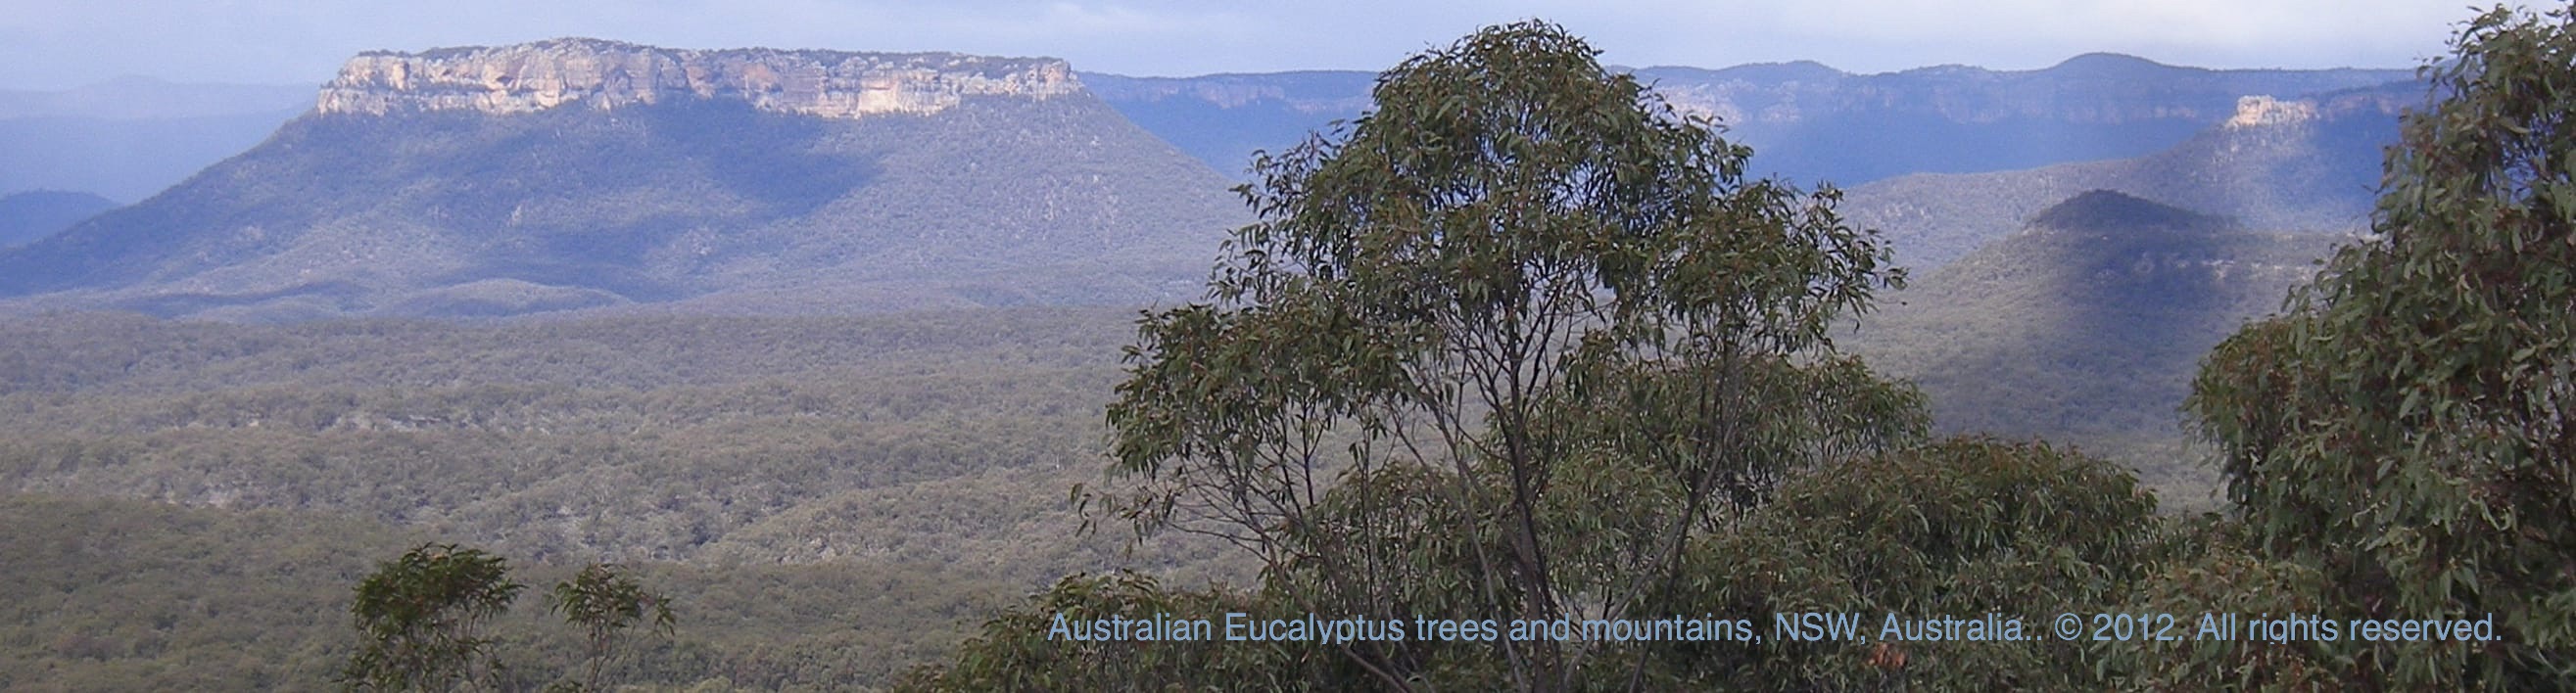 Picture - Australian Eucalyptus trees & Mountains in the Outback. ©.